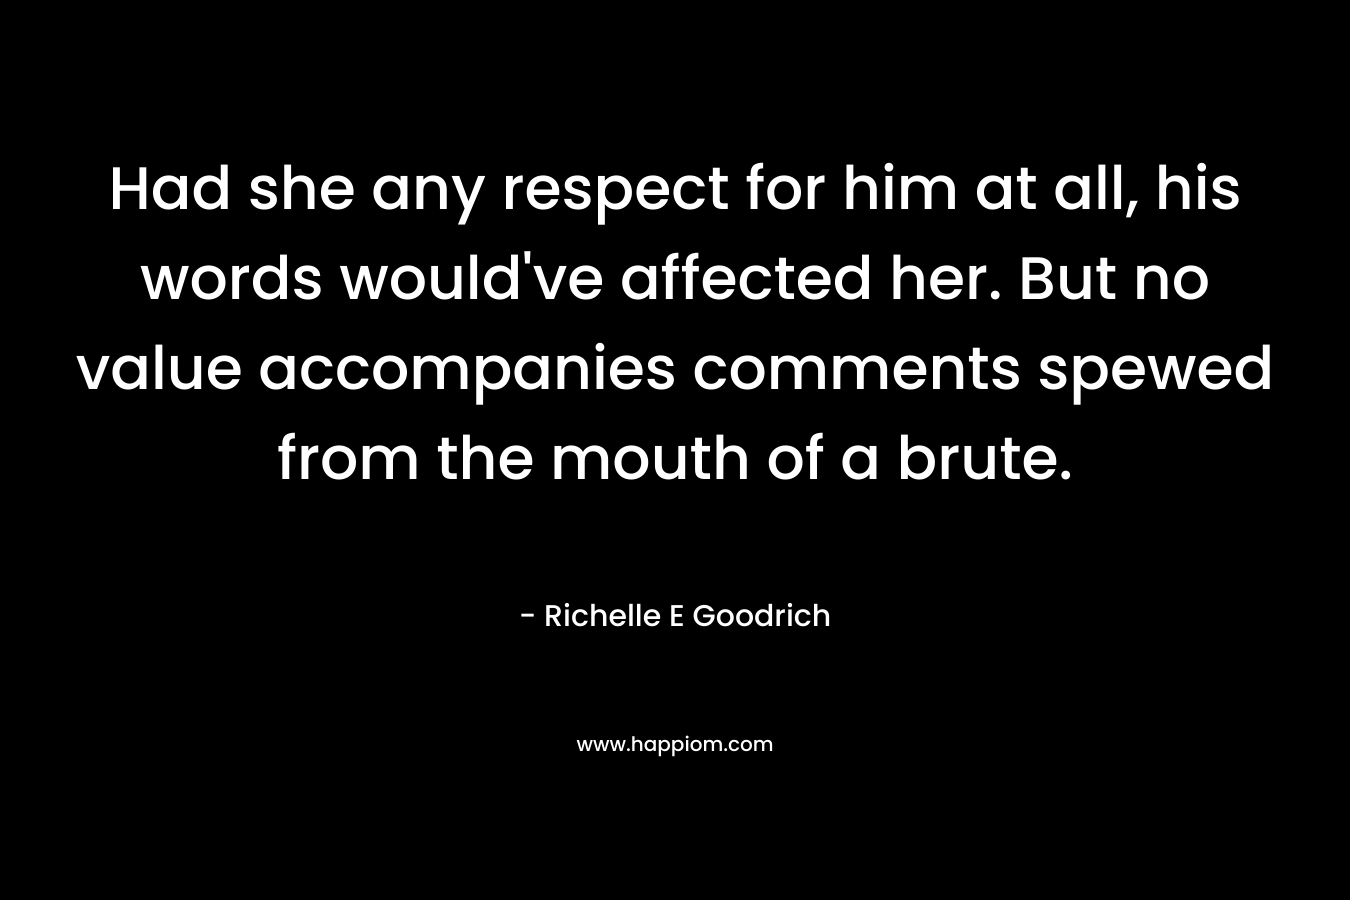 Had she any respect for him at all, his words would’ve affected her. But no value accompanies comments spewed from the mouth of a brute. – Richelle E Goodrich